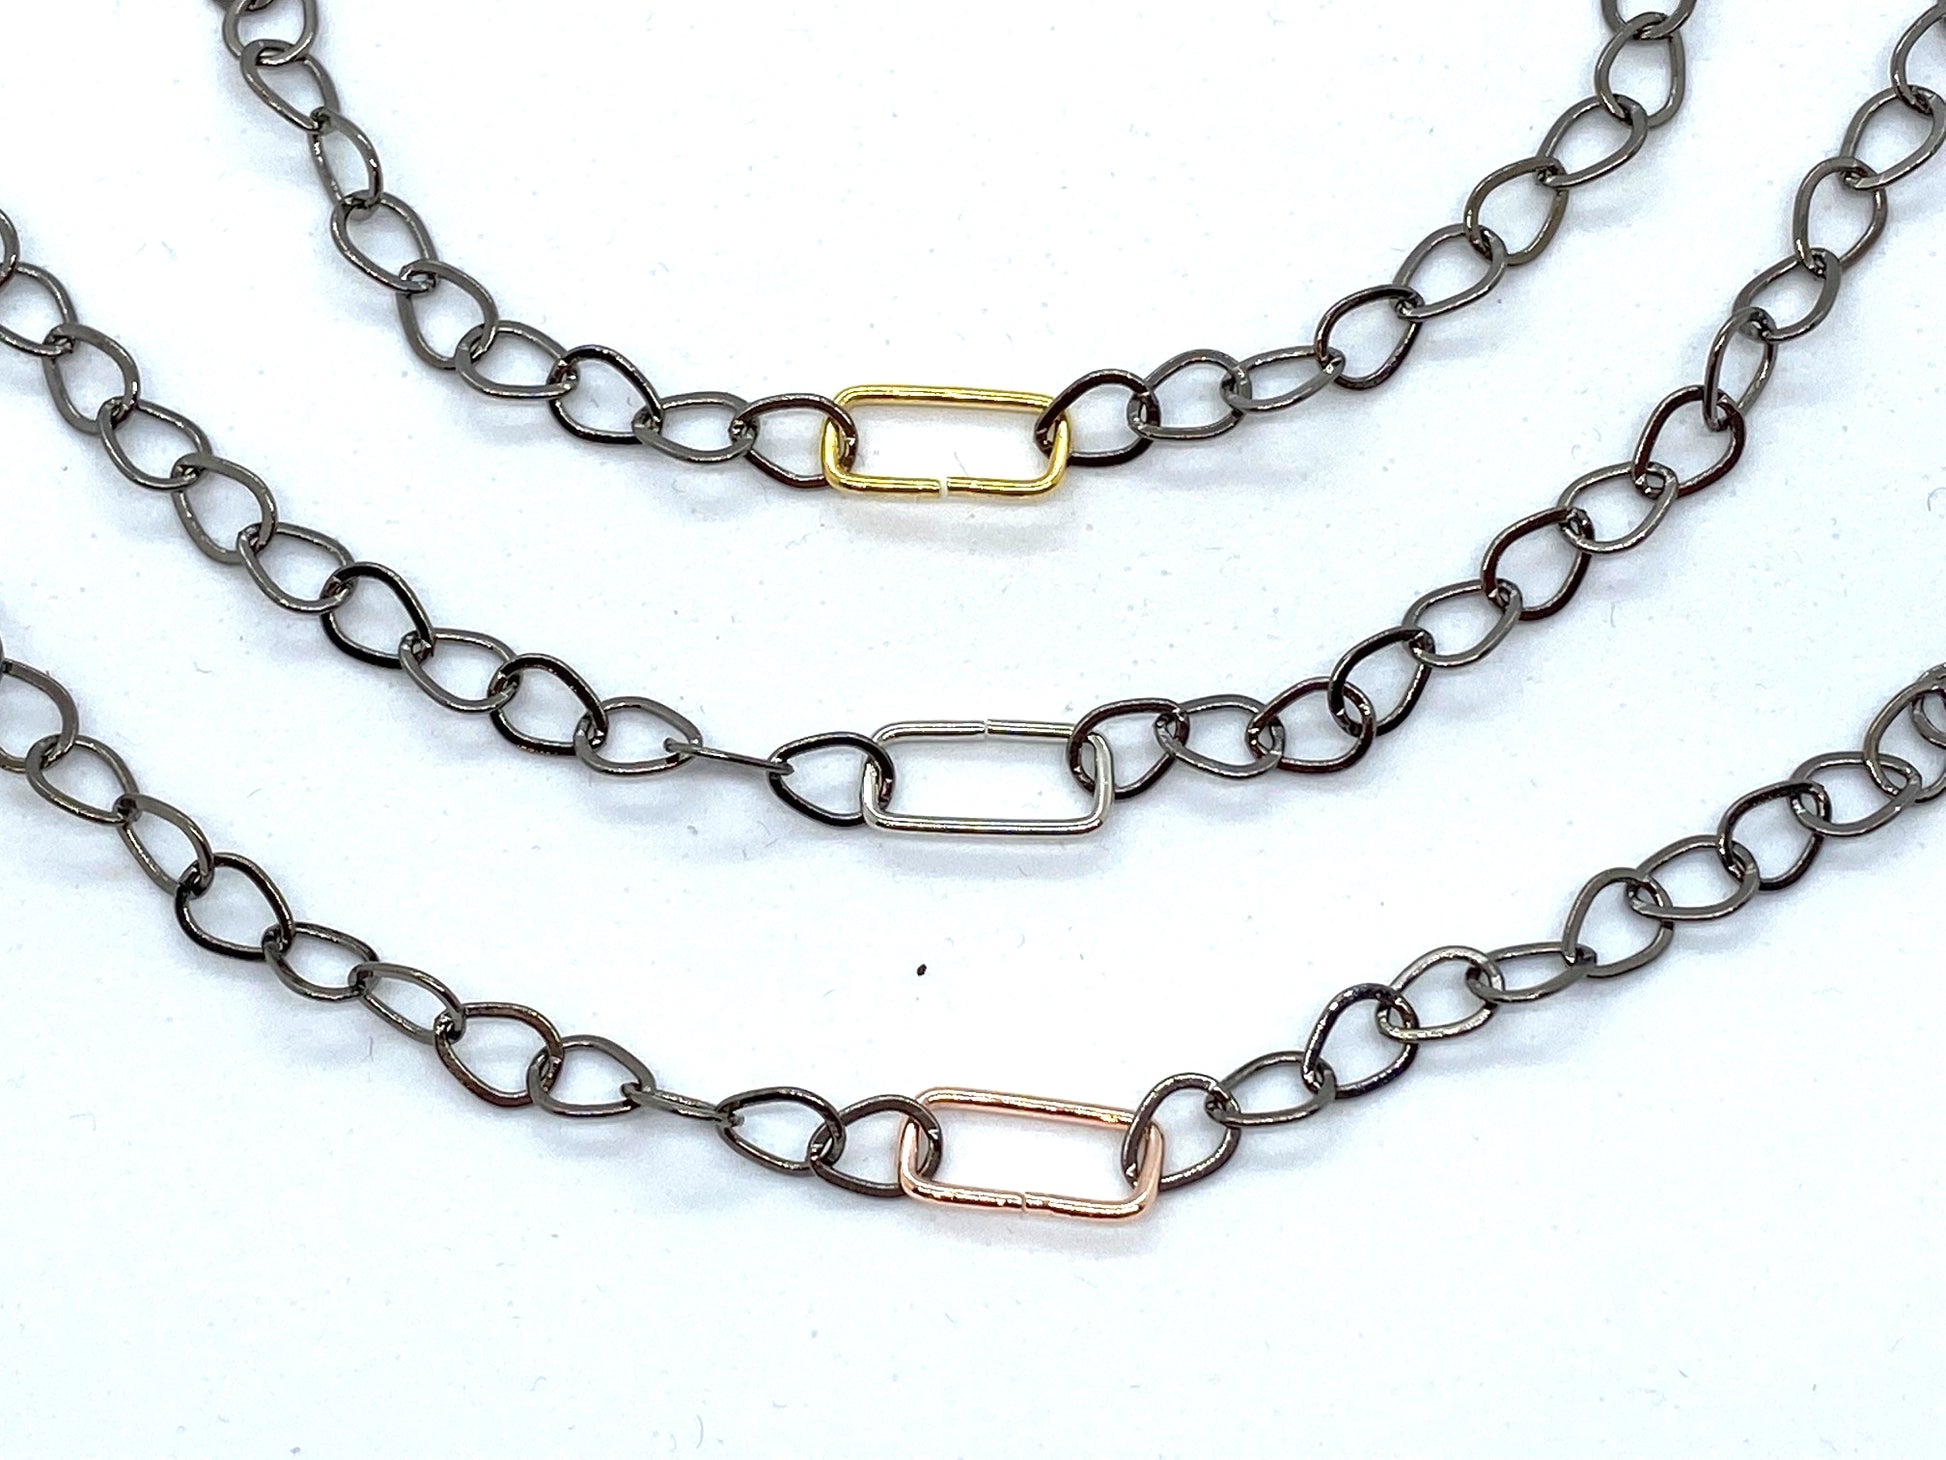 Two Tone Linking Rectangle - Emmis Jewelry, Apparel & Accessories, [product_color]